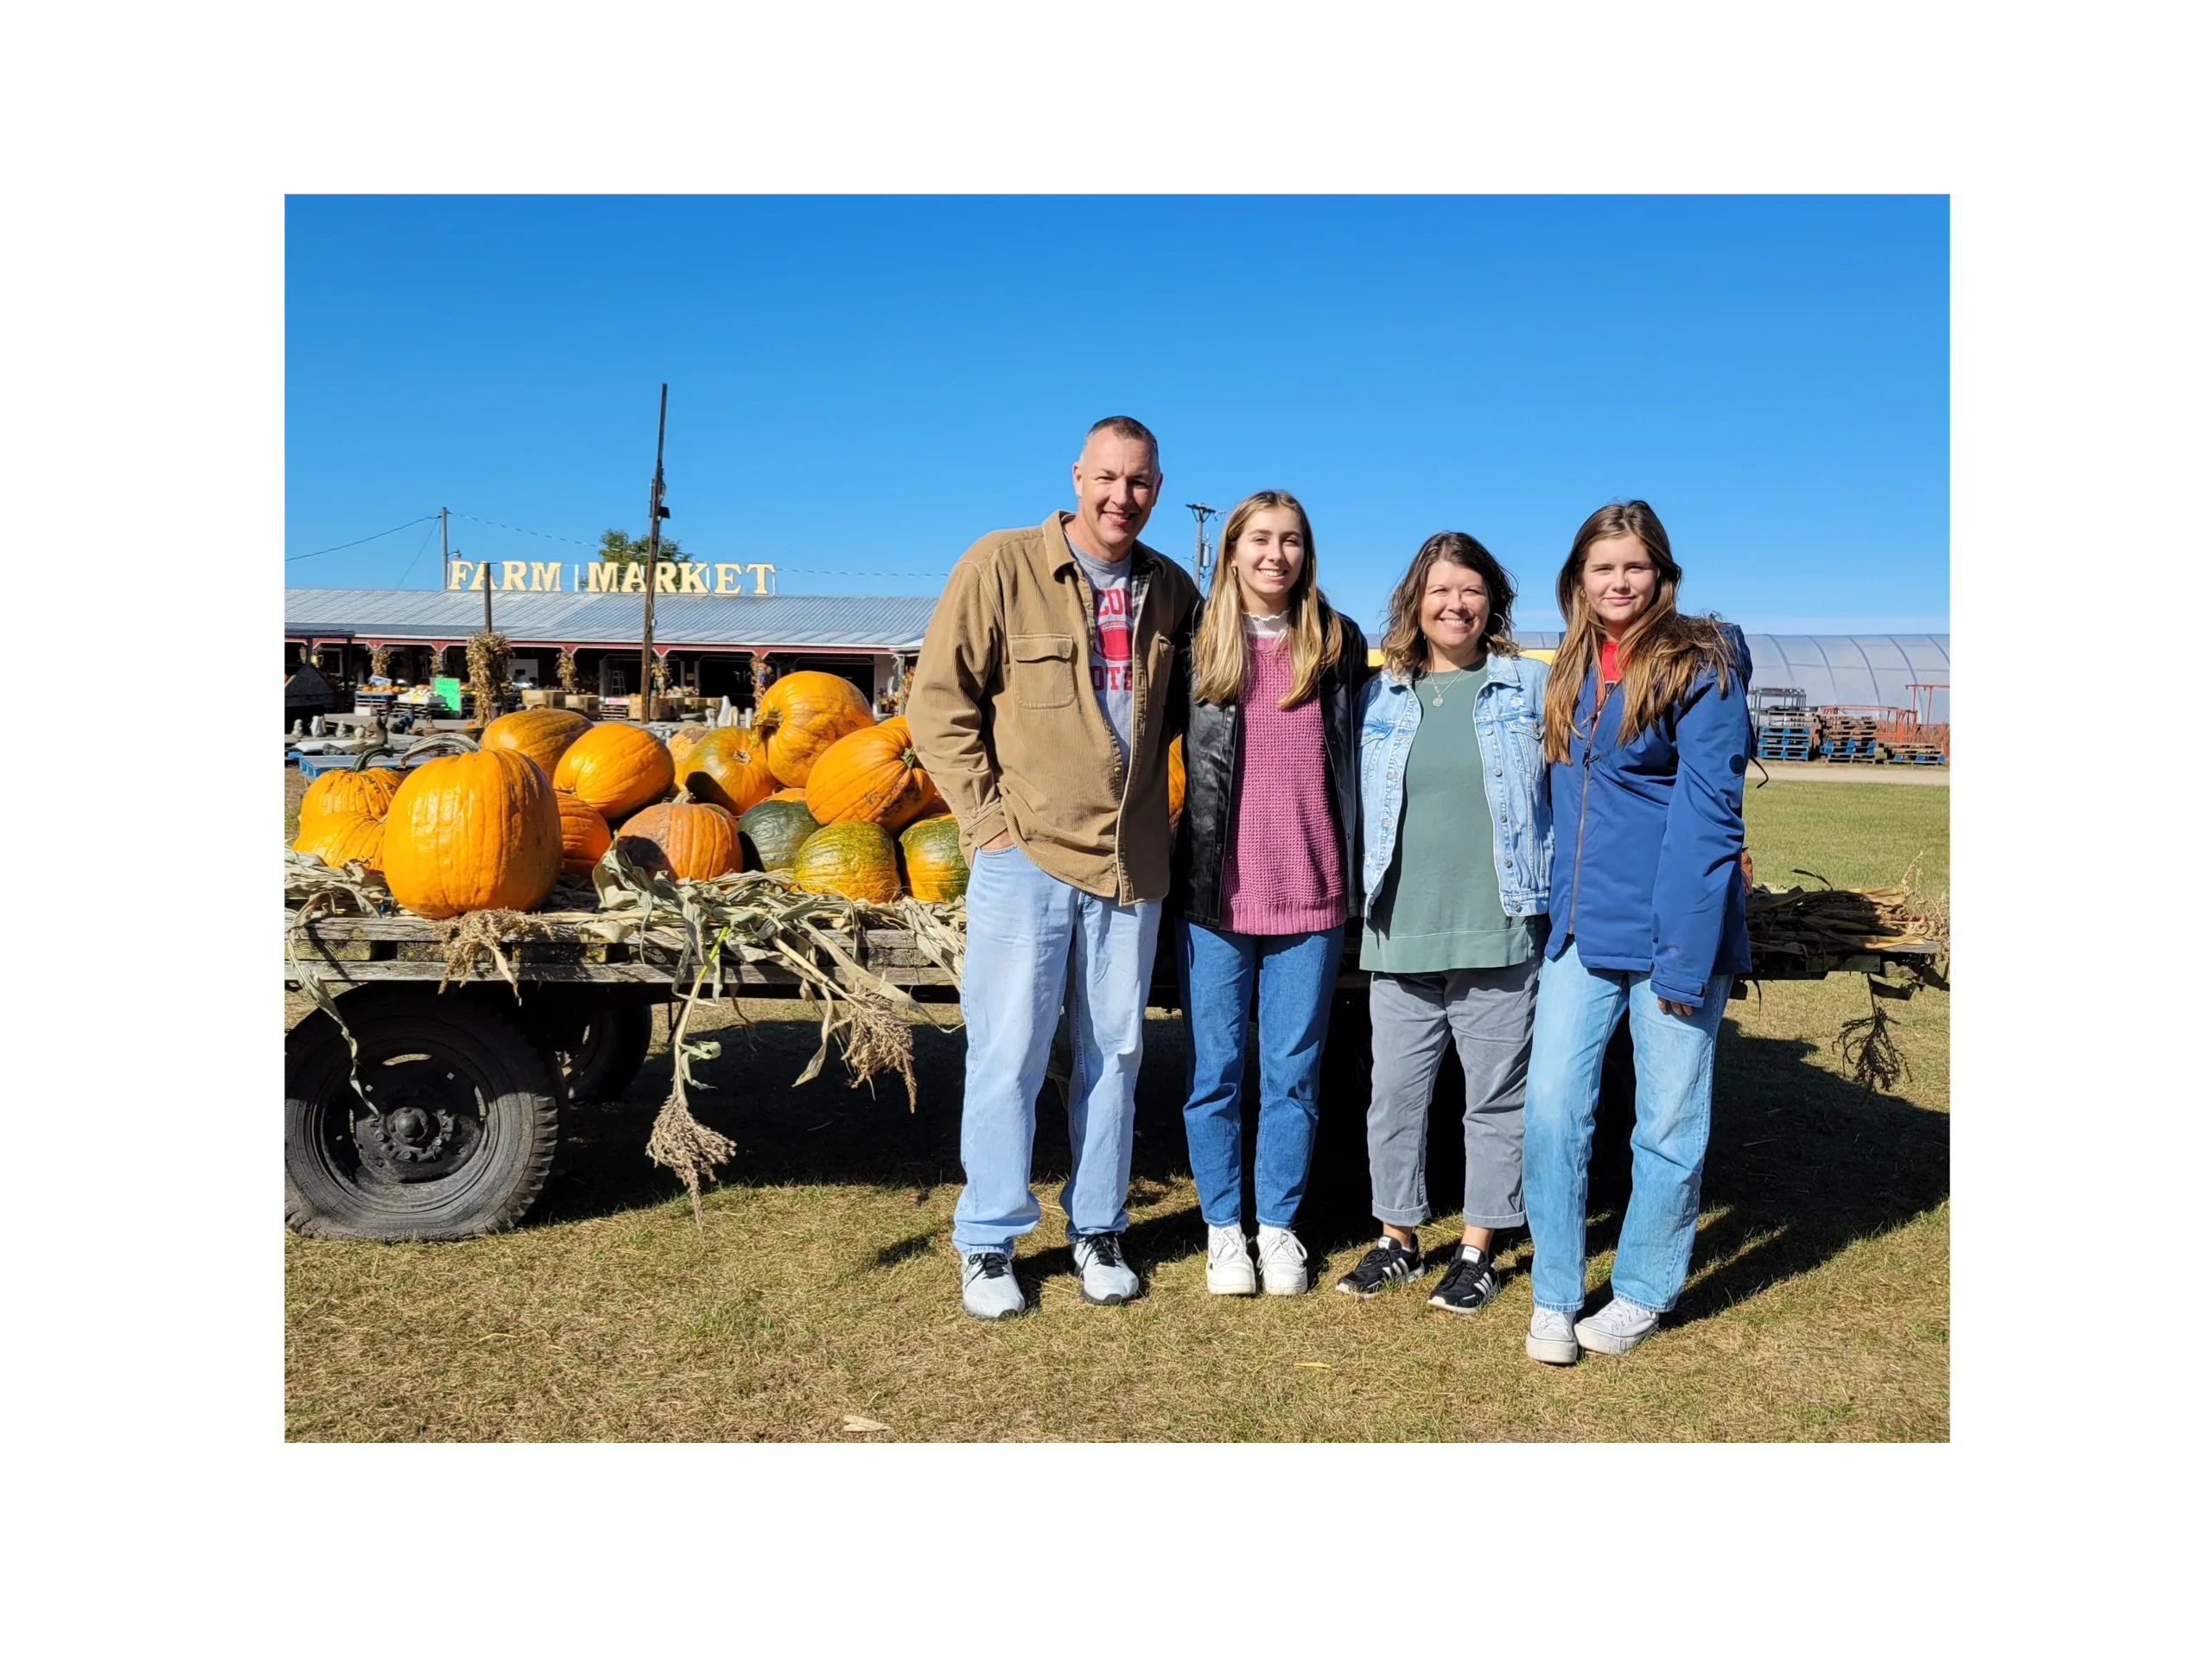 Group of people standing near a cart with pumpkins